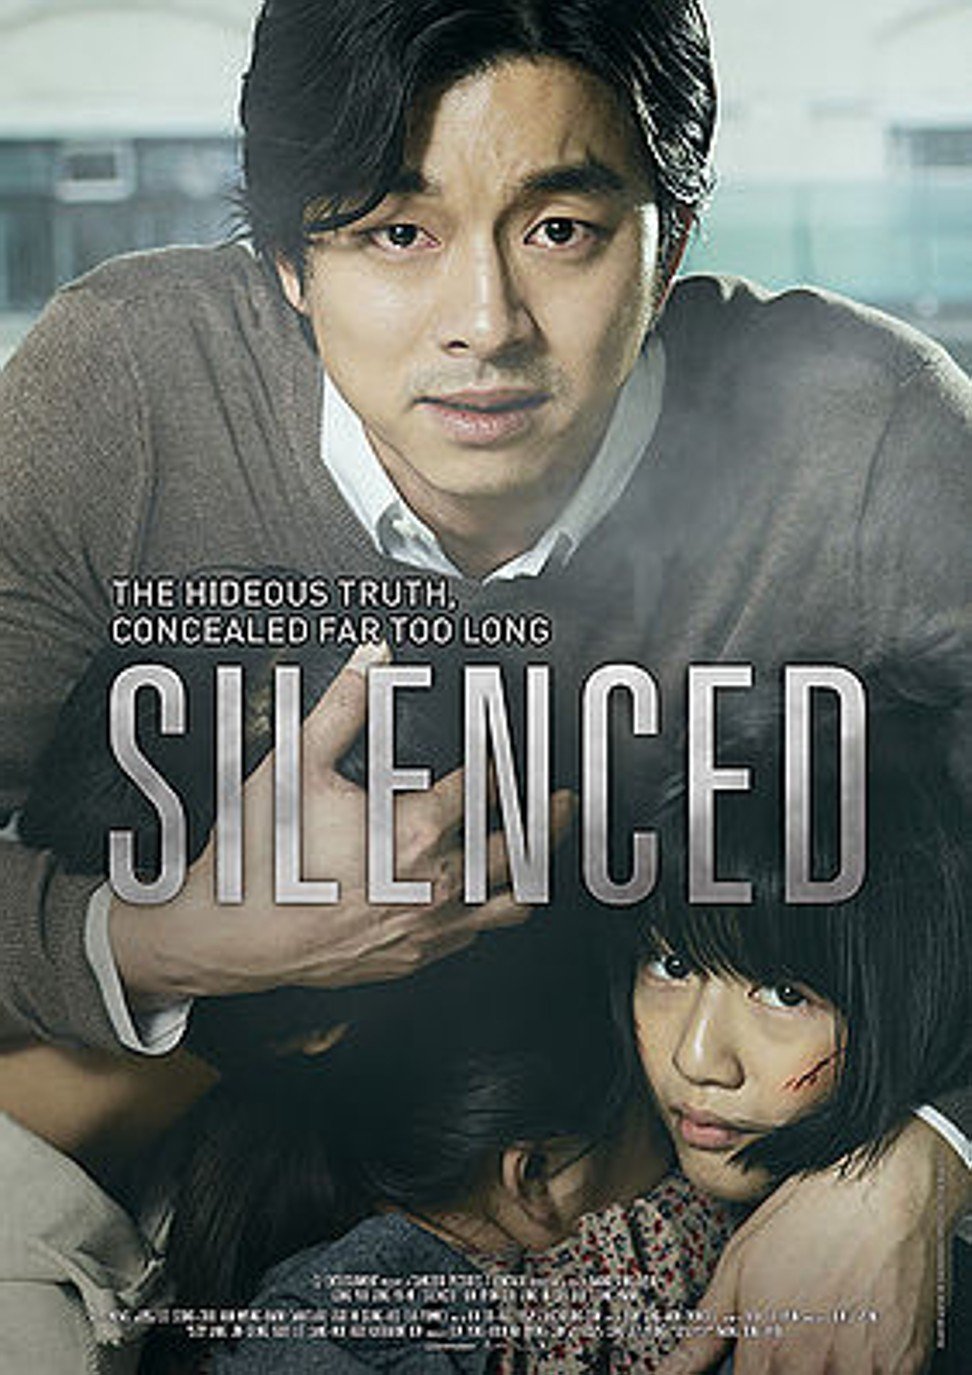 Poster for the 2011 film Silenced, which dramatised systemic child sexual abuse at a deaf school in South Korea. Photo: Handout